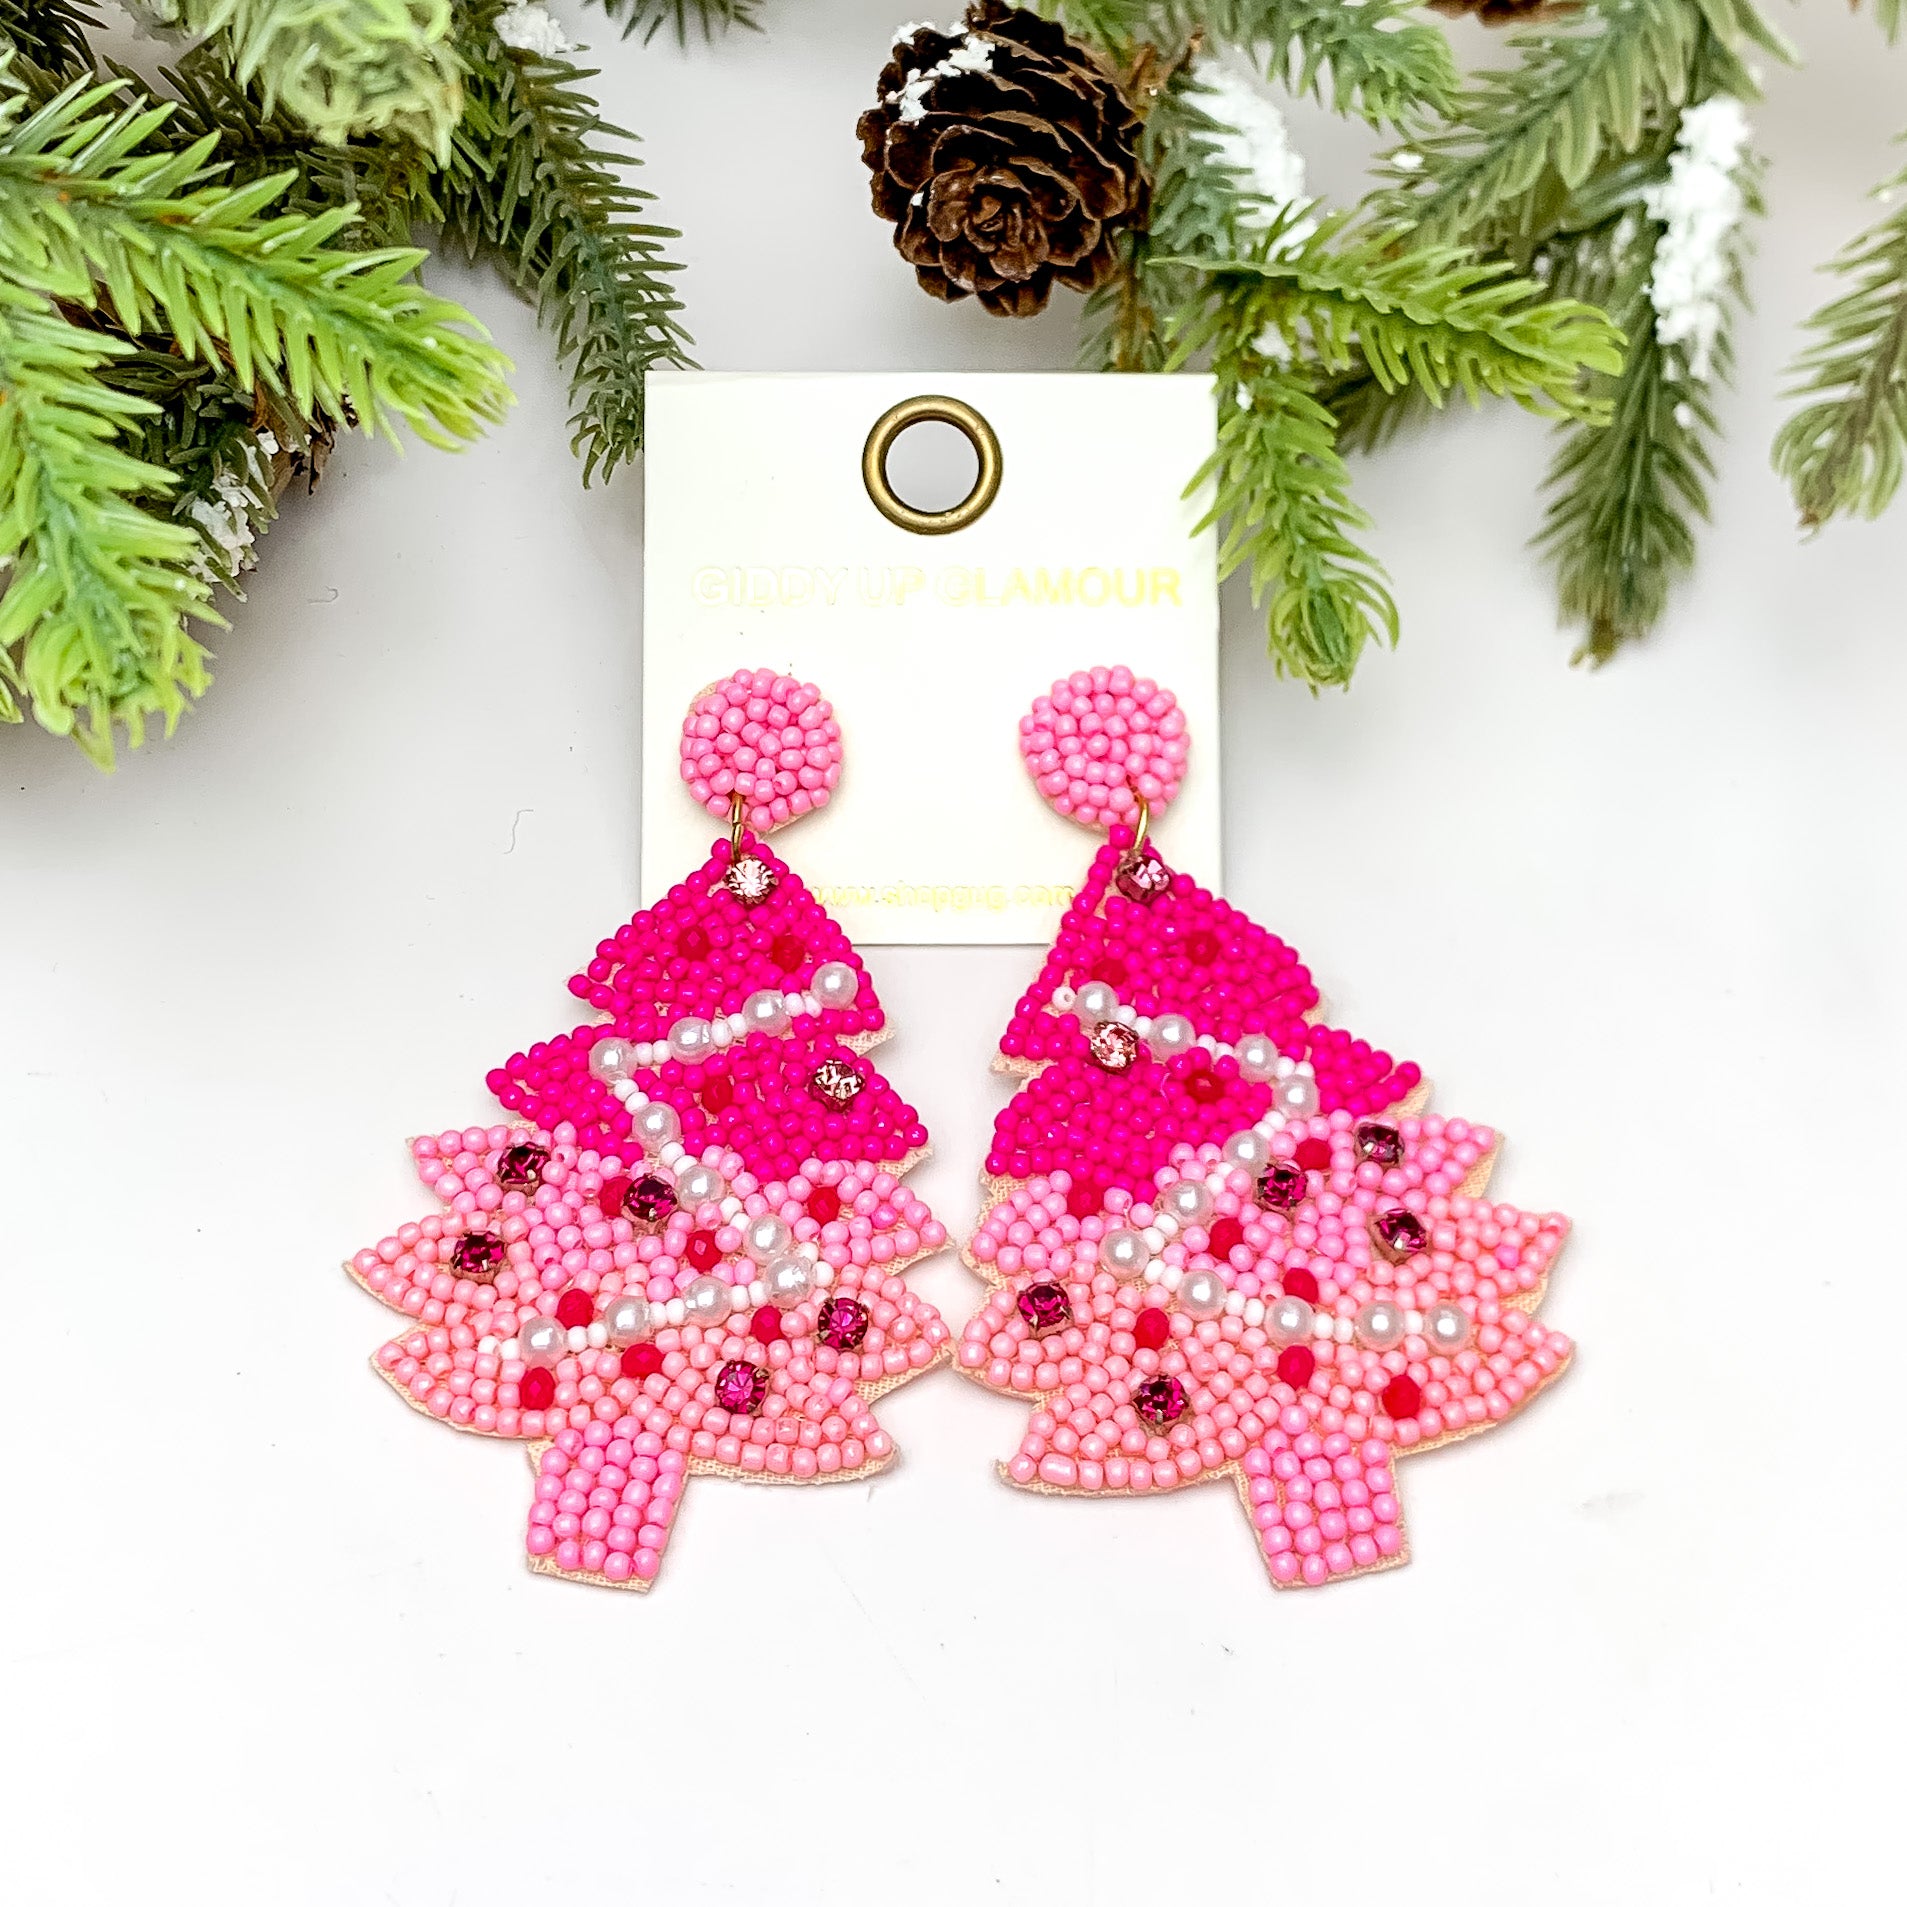 Beaded Christmas Tree Earrings in Pink Tones. These earrings are pictured on a white background with a tree and pine cones at the top.